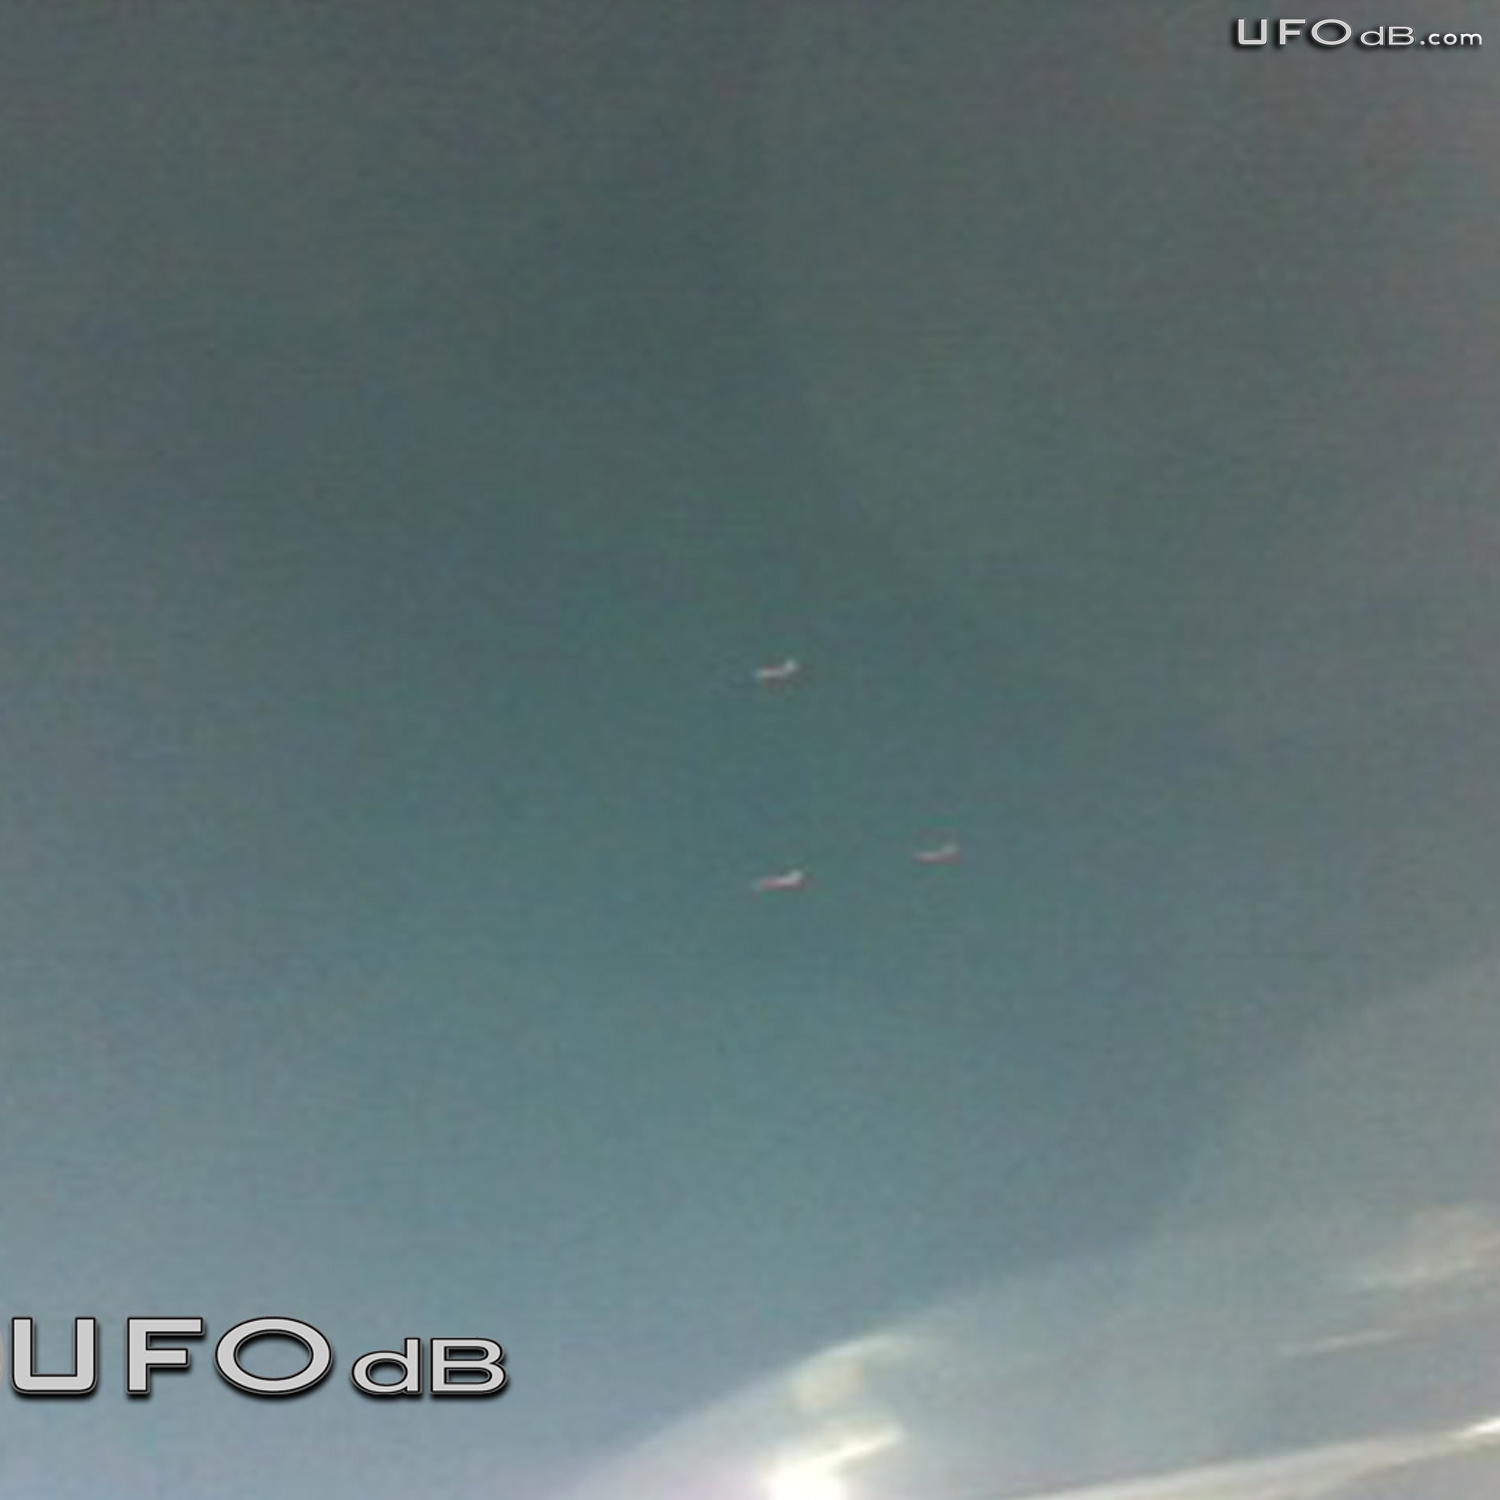 Lady Terrified by Huge UFO over her house | Illinois, USA | May 4 2011 UFO Picture #290-2